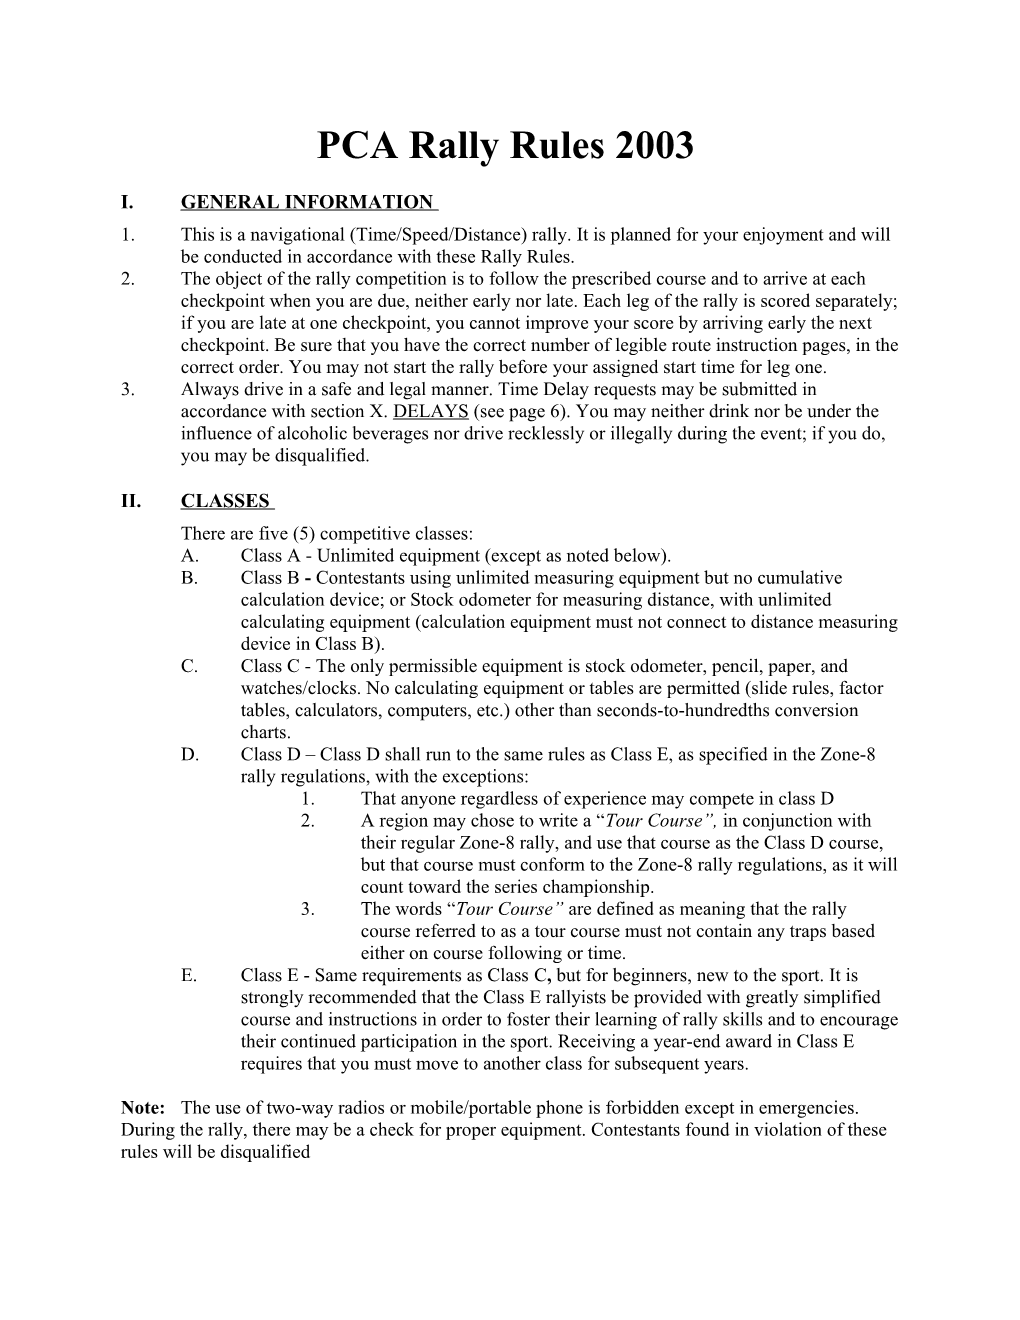 PCA 2003 Rally Rules